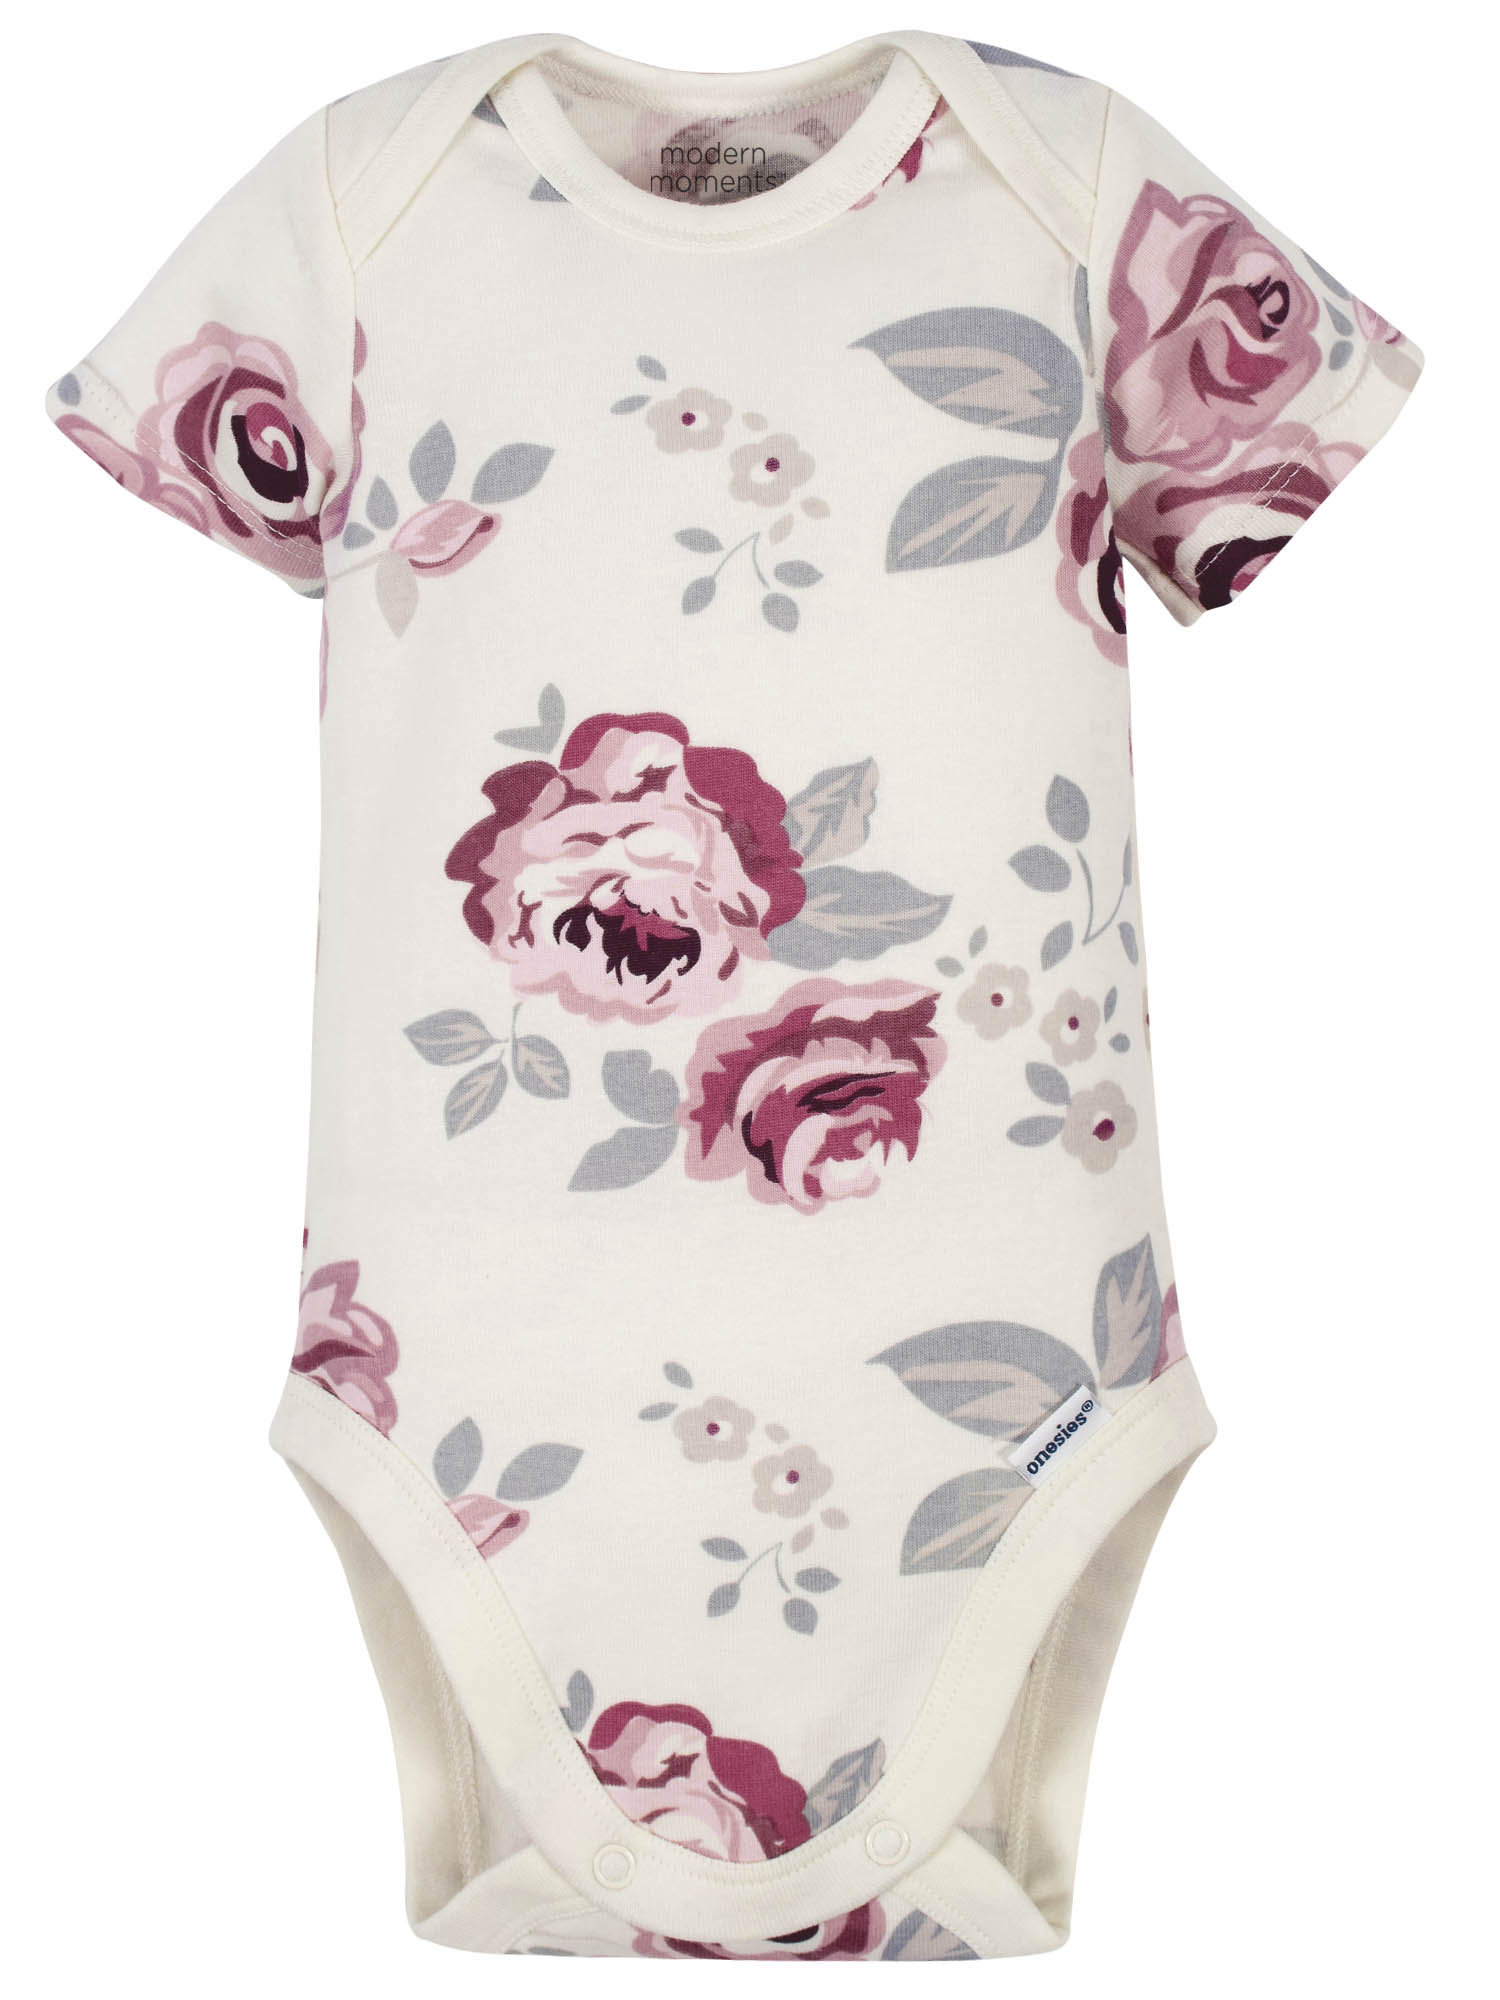 Modern Moments by Gerber Baby Girl Bodysuits, 4-Pack, Newborn-12 Months - image 5 of 8